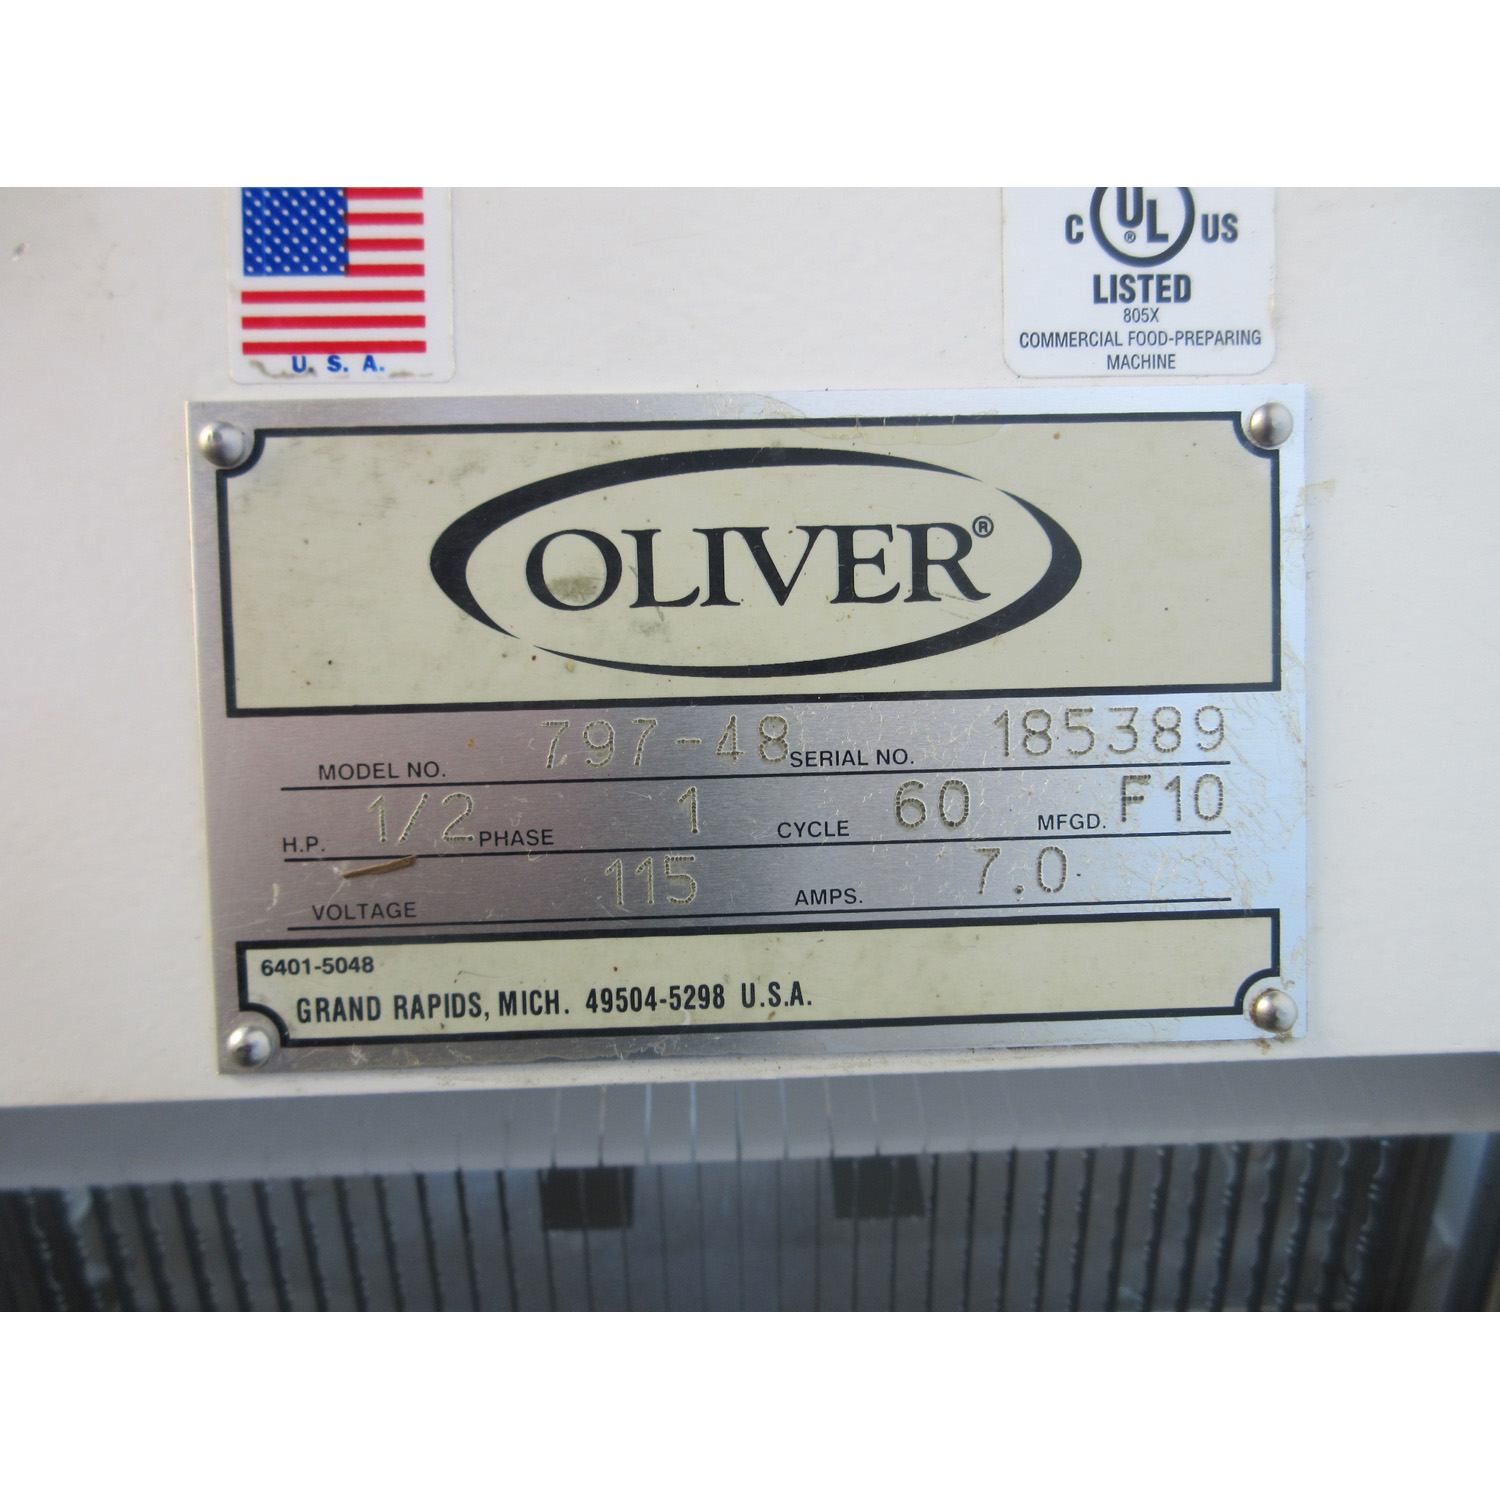 Oliver 797-48 Bread Slicer 7/16" Cut, Used Great Condition image 4